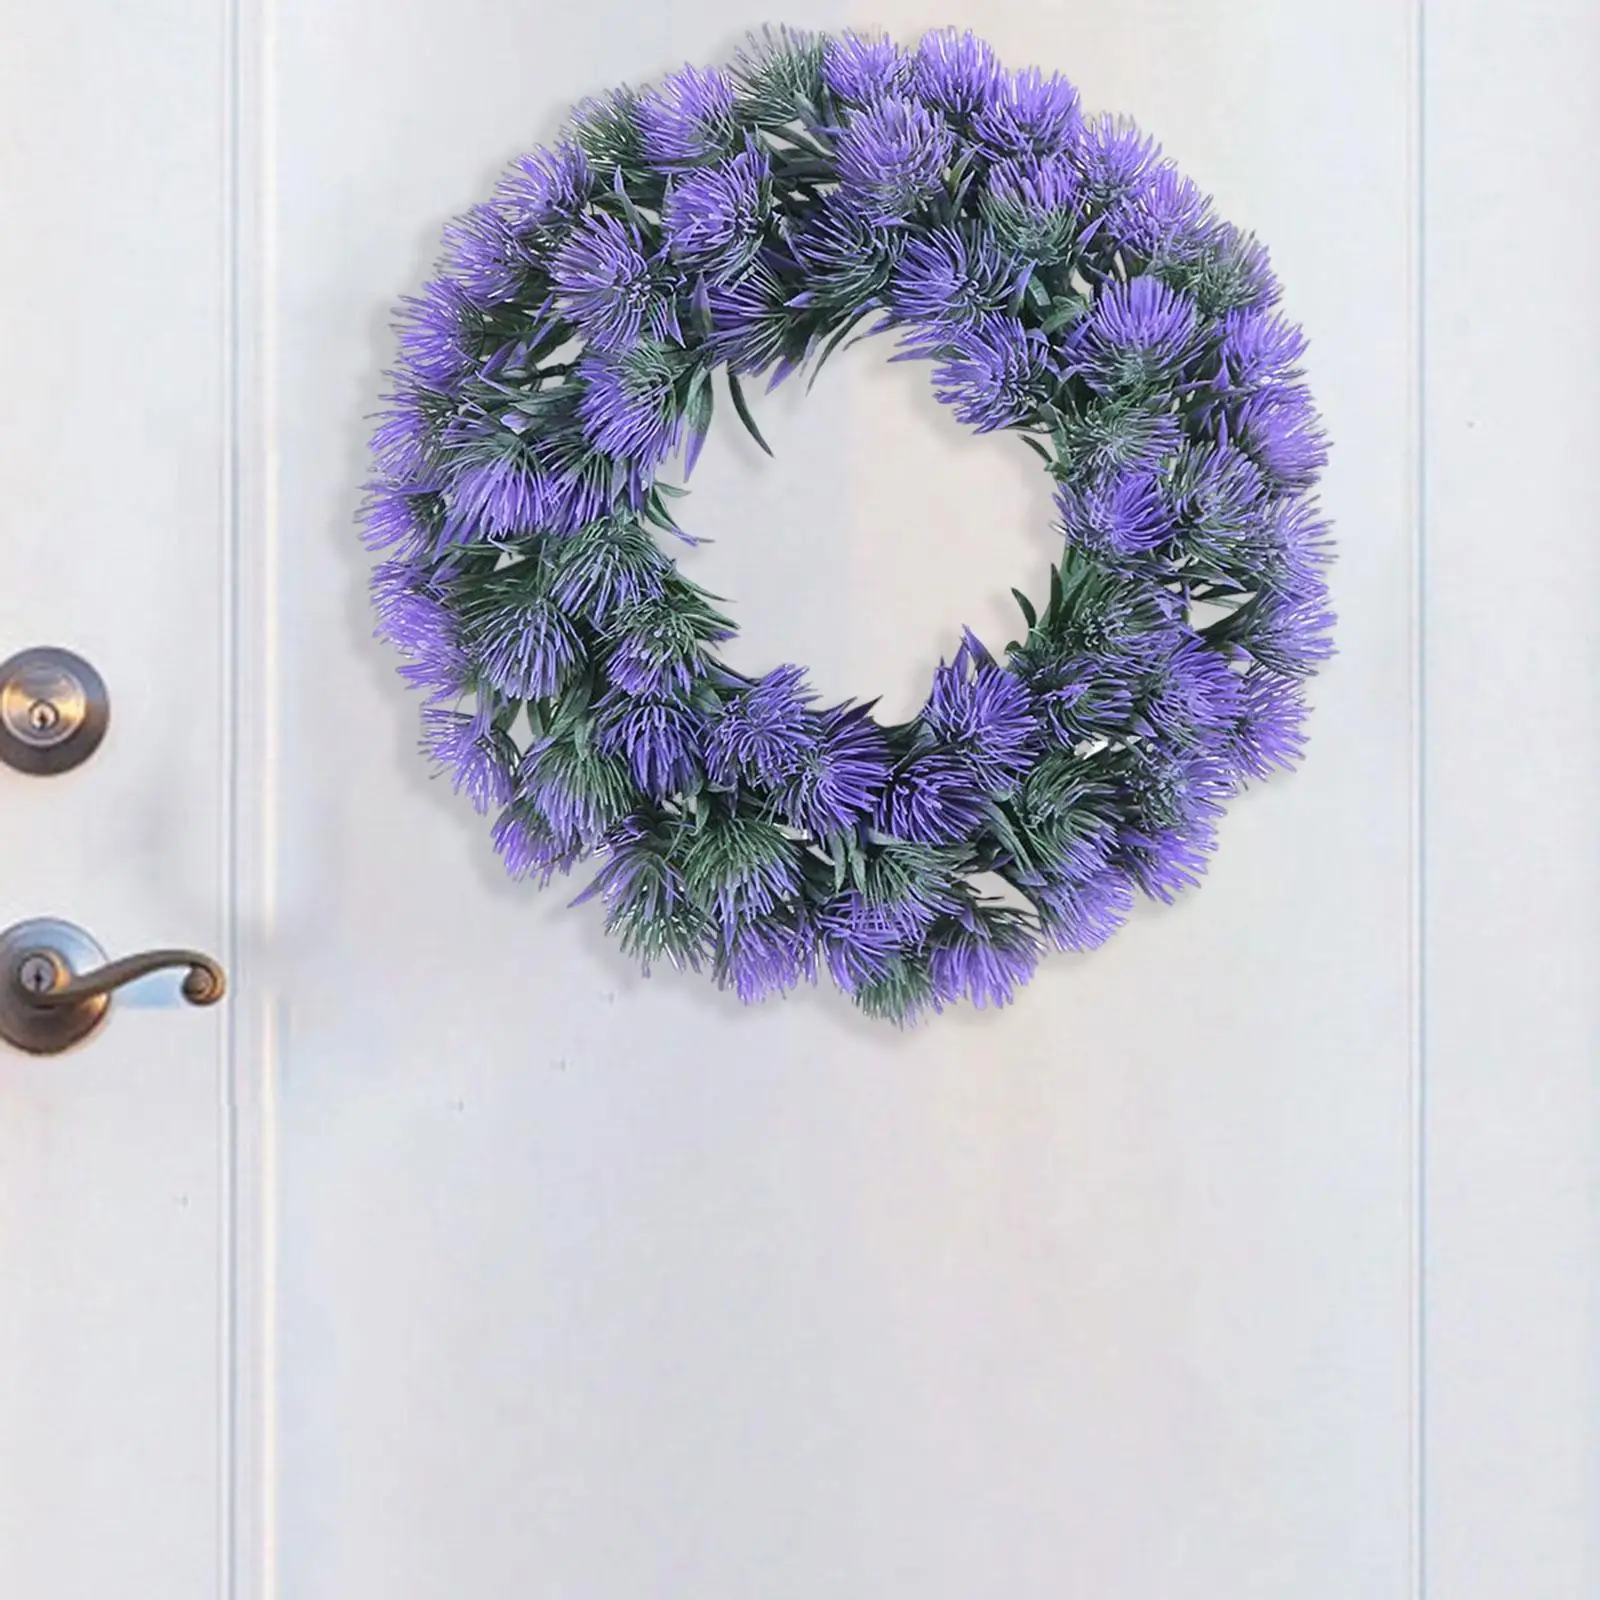 Lavender Wreath Spring Door Wreath Decorative Hanging Green Leaves Garland Flower Wreath for Home Window Party Holiday Decor